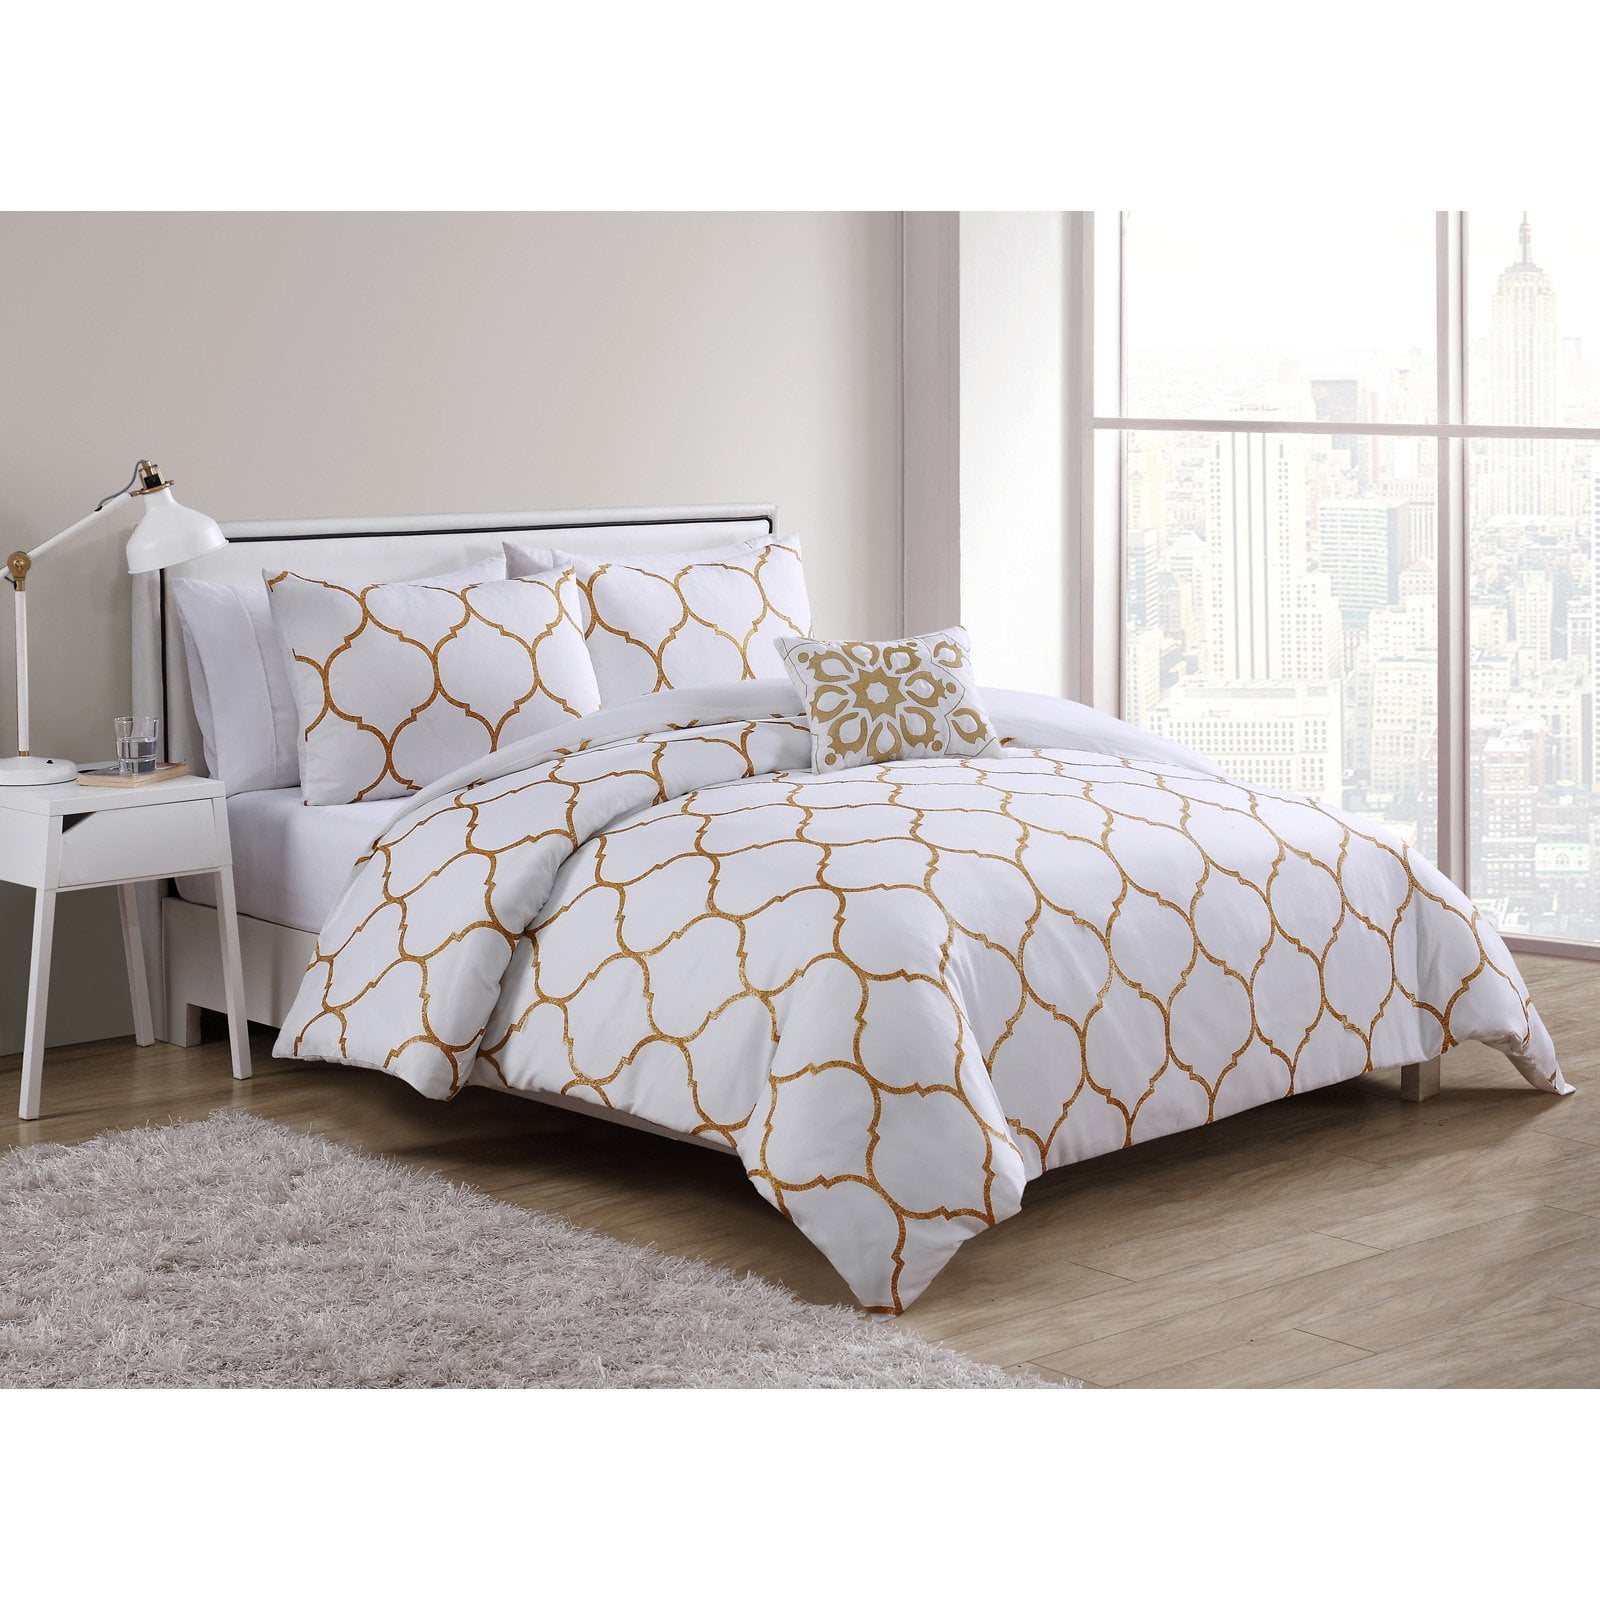 VCNY Home Ogee 3/4 Piece Comforter Bedding Set, Shams Included ...